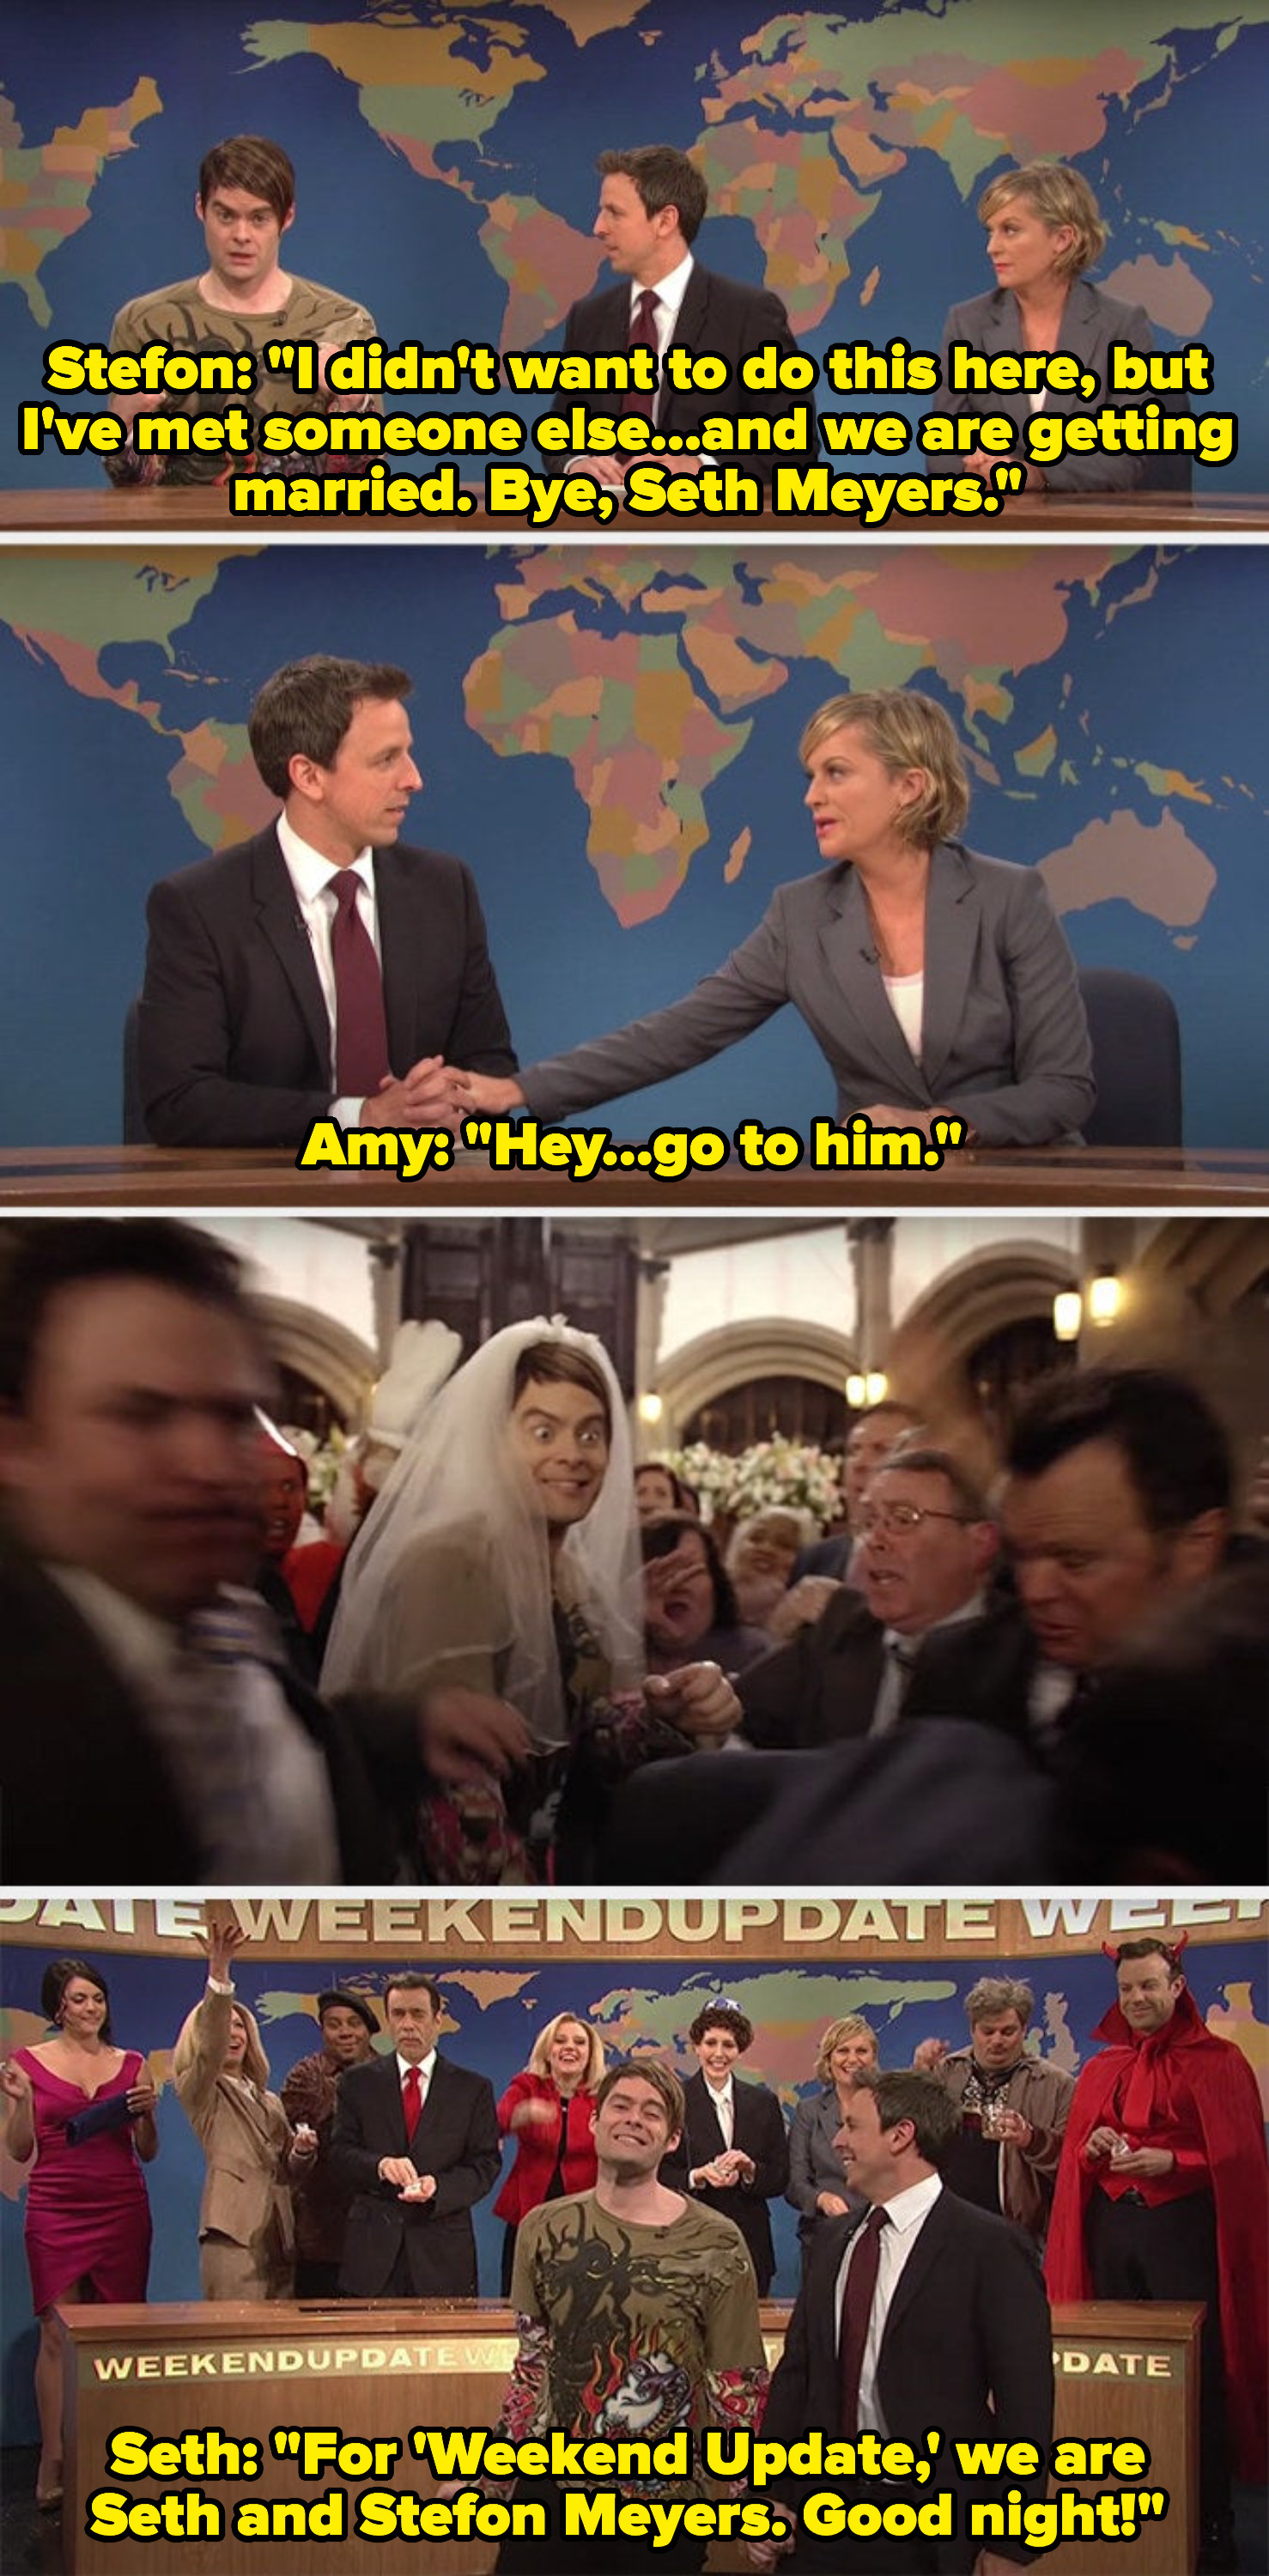 Bill Hader as Stefon leaves Weekend Update and Seth Meyers crashes his wedding before returning to Weekend Update as &quot;Seth and Stefon Meyers&quot;